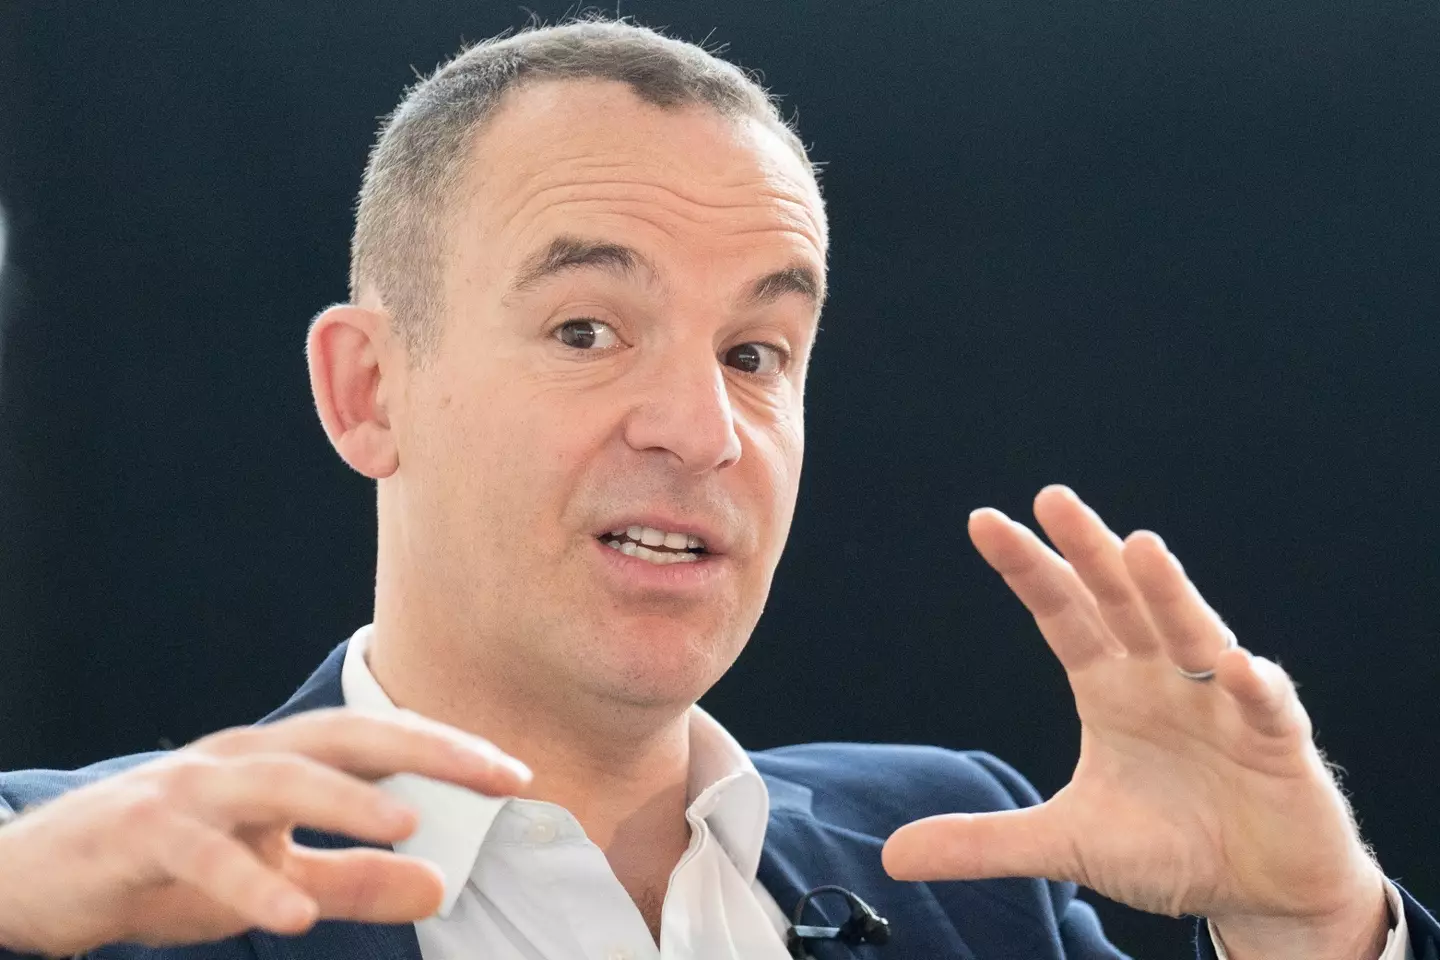 Listen to Martin Lewis and his team.